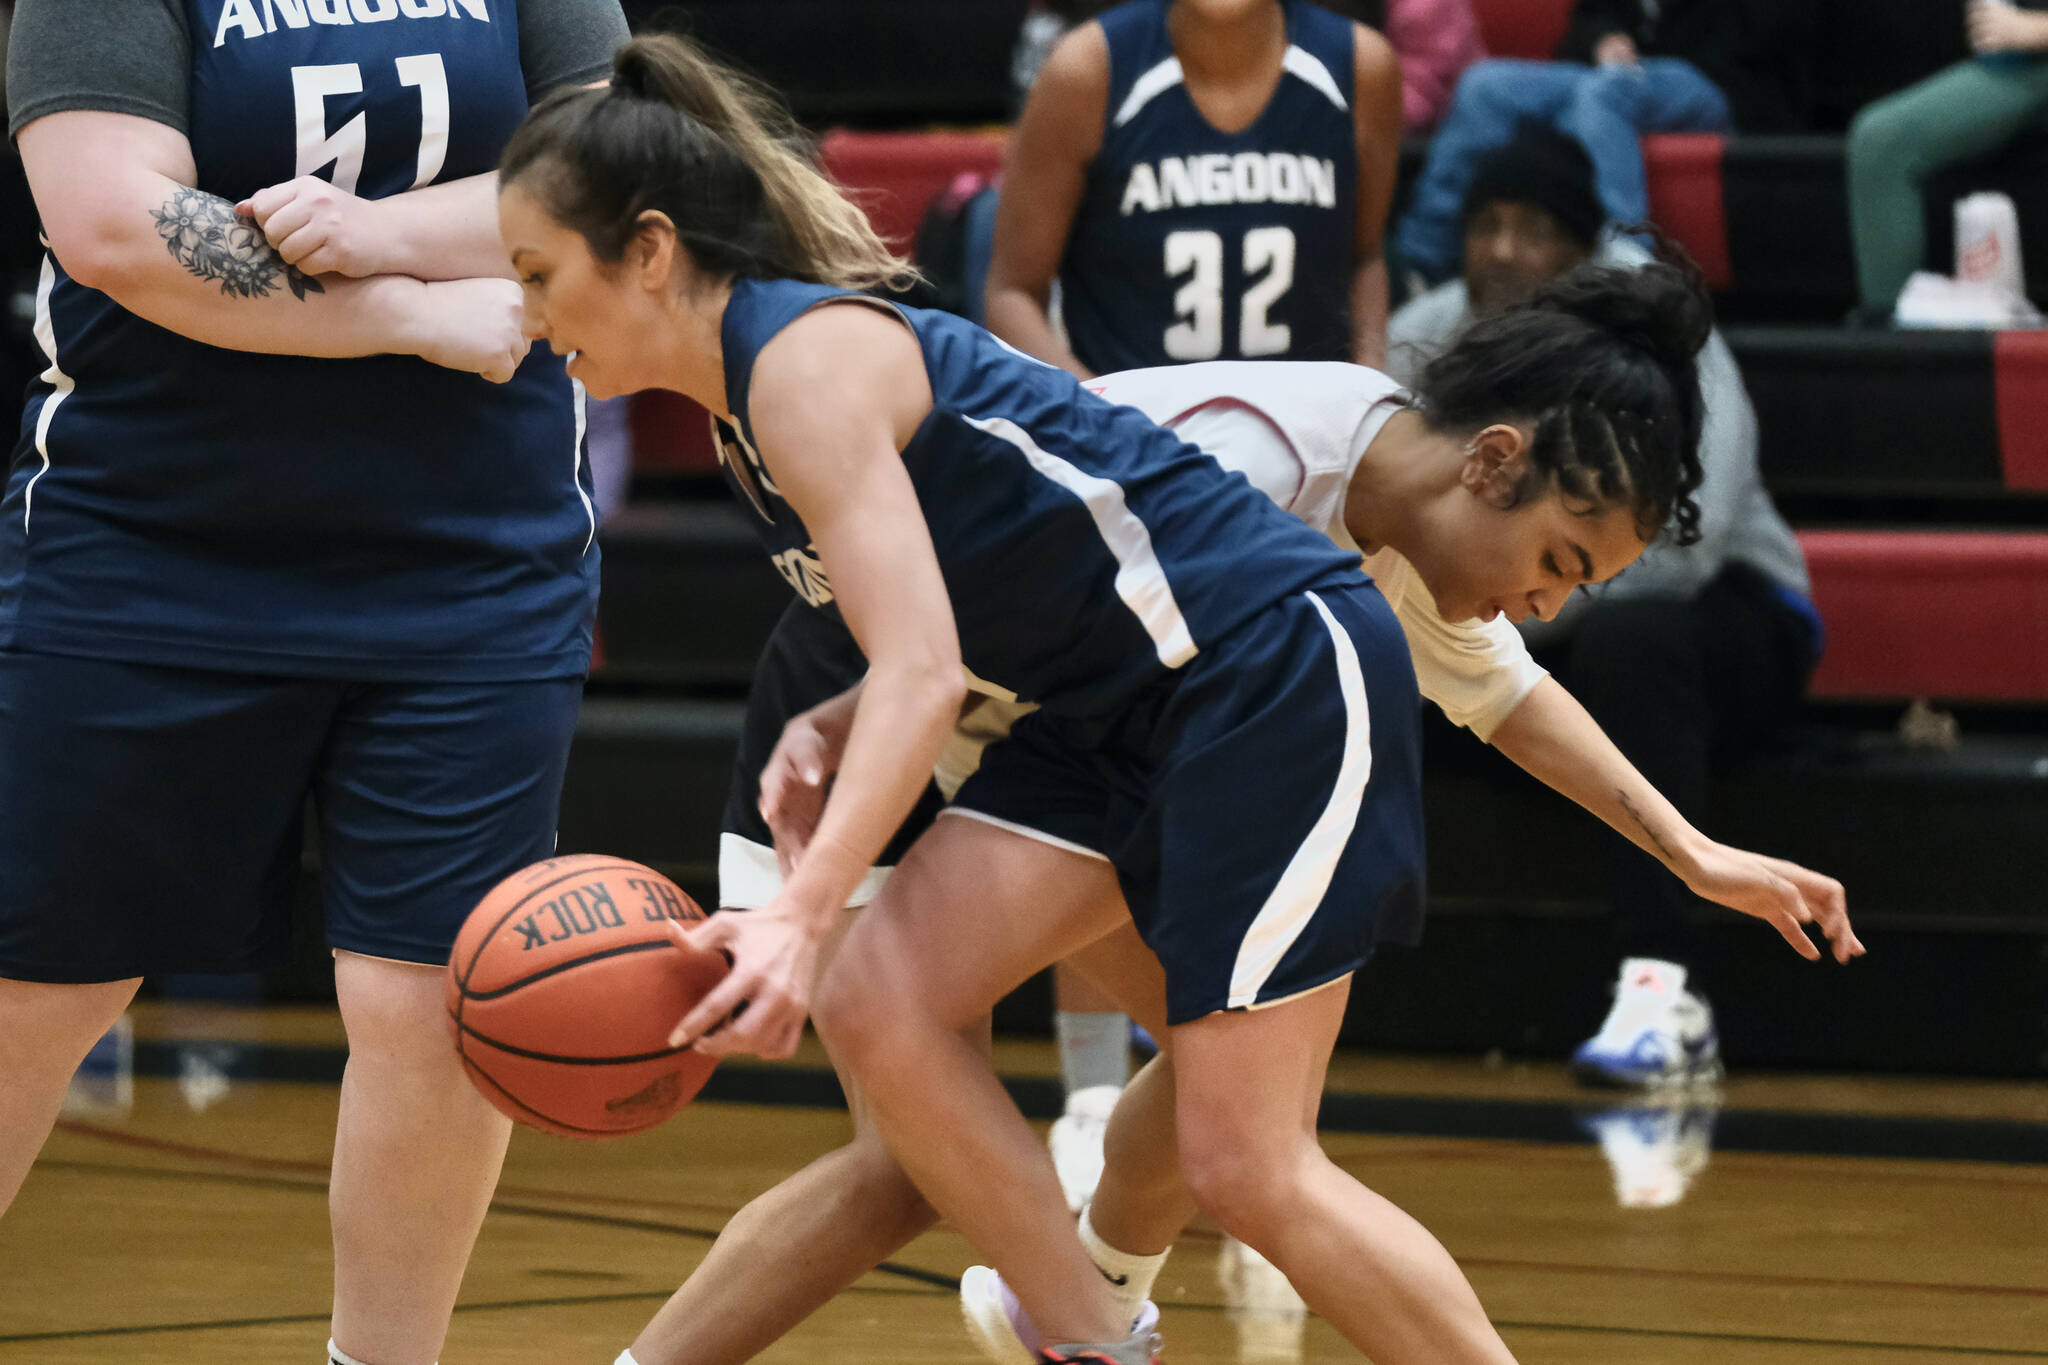 Angoon's Carmeleeda Estrada is pressured by Kake's Willow Jackson during Thursday action at the Juneau Lions Club 74th Annual Gold Medal Basketball Tournament at Juneau-Douglas High School: Yadaa.at Kalé. (Klas Stolpe/For the Juneau Empire)